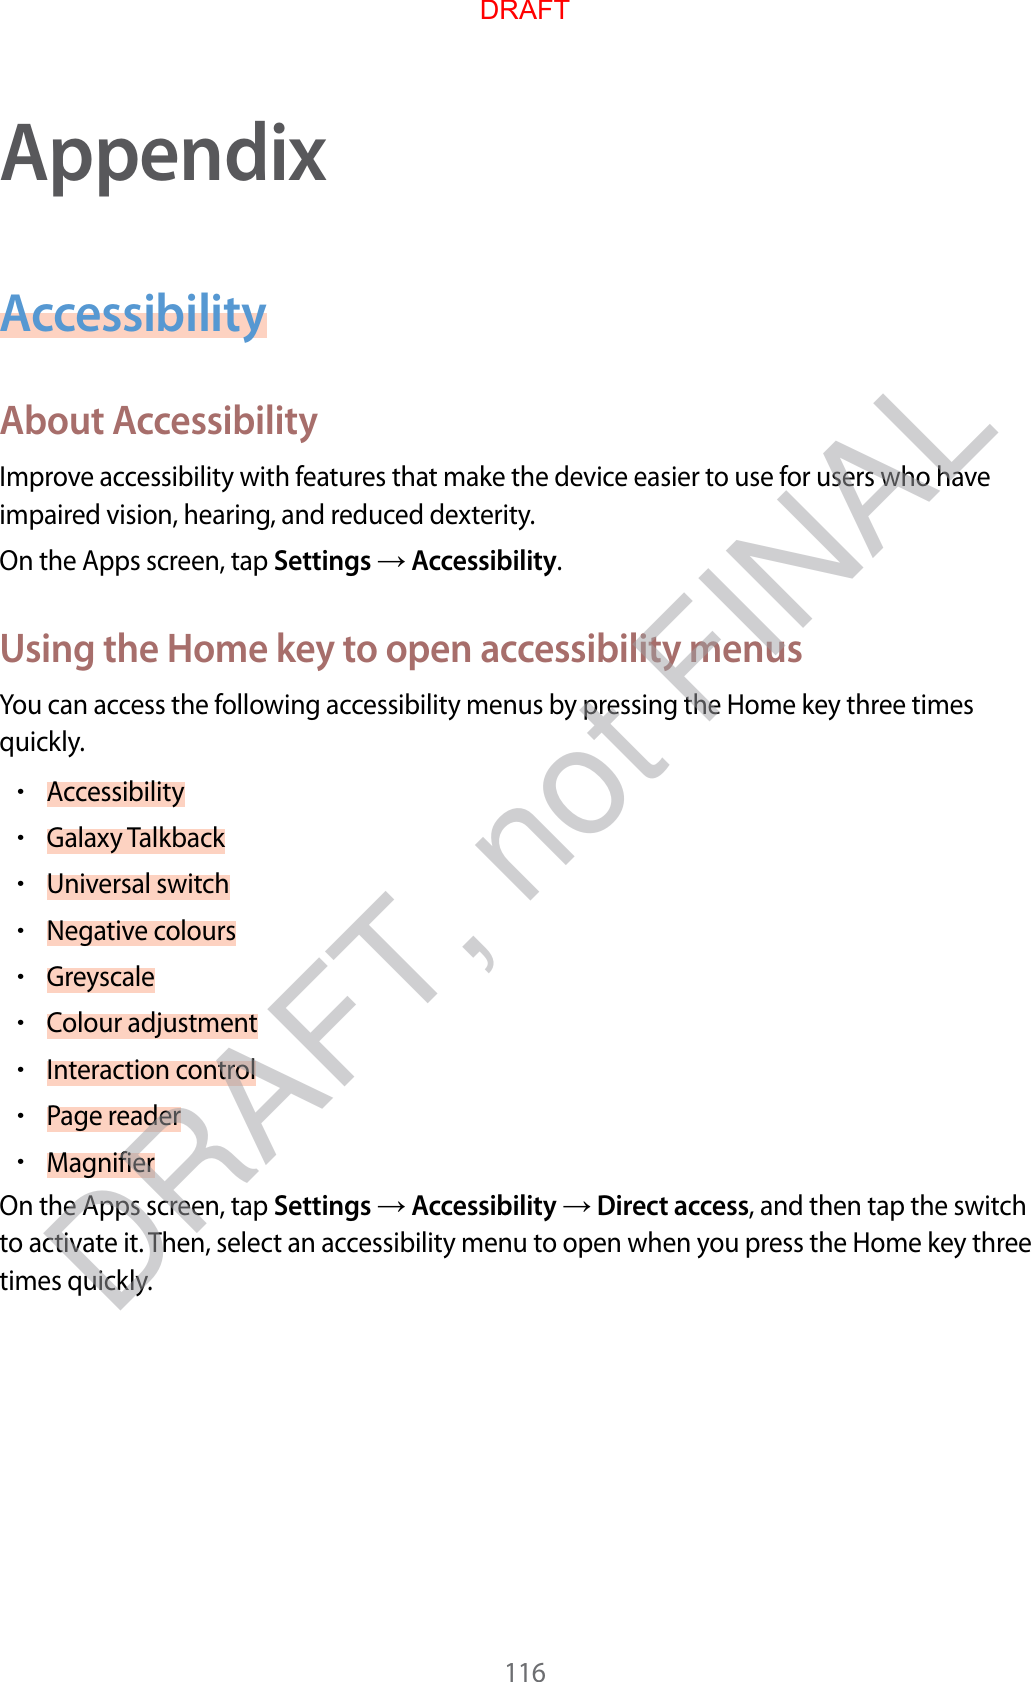 116AppendixAccessibilityAbout AccessibilityImprove accessibility with features that make the device easier to use for users who have impaired vision, hearing, and reduced dexterity.On the Apps screen, tap Settings  Accessibility.Using the Home key to open accessibility menusYou can access the following accessibility menus by pressing the Home key three times quickly.•Accessibility•Galaxy Talkback•Universal switch•Negative colours•Greyscale•Colour adjustment•Interaction control•Page reader•MagnifierOn the Apps screen, tap Settings  Accessibility  Direct access, and then tap the switch to activate it. Then, select an accessibility menu to open when you press the Home key three times quickly.DRAFTDRAFT, not FINAL